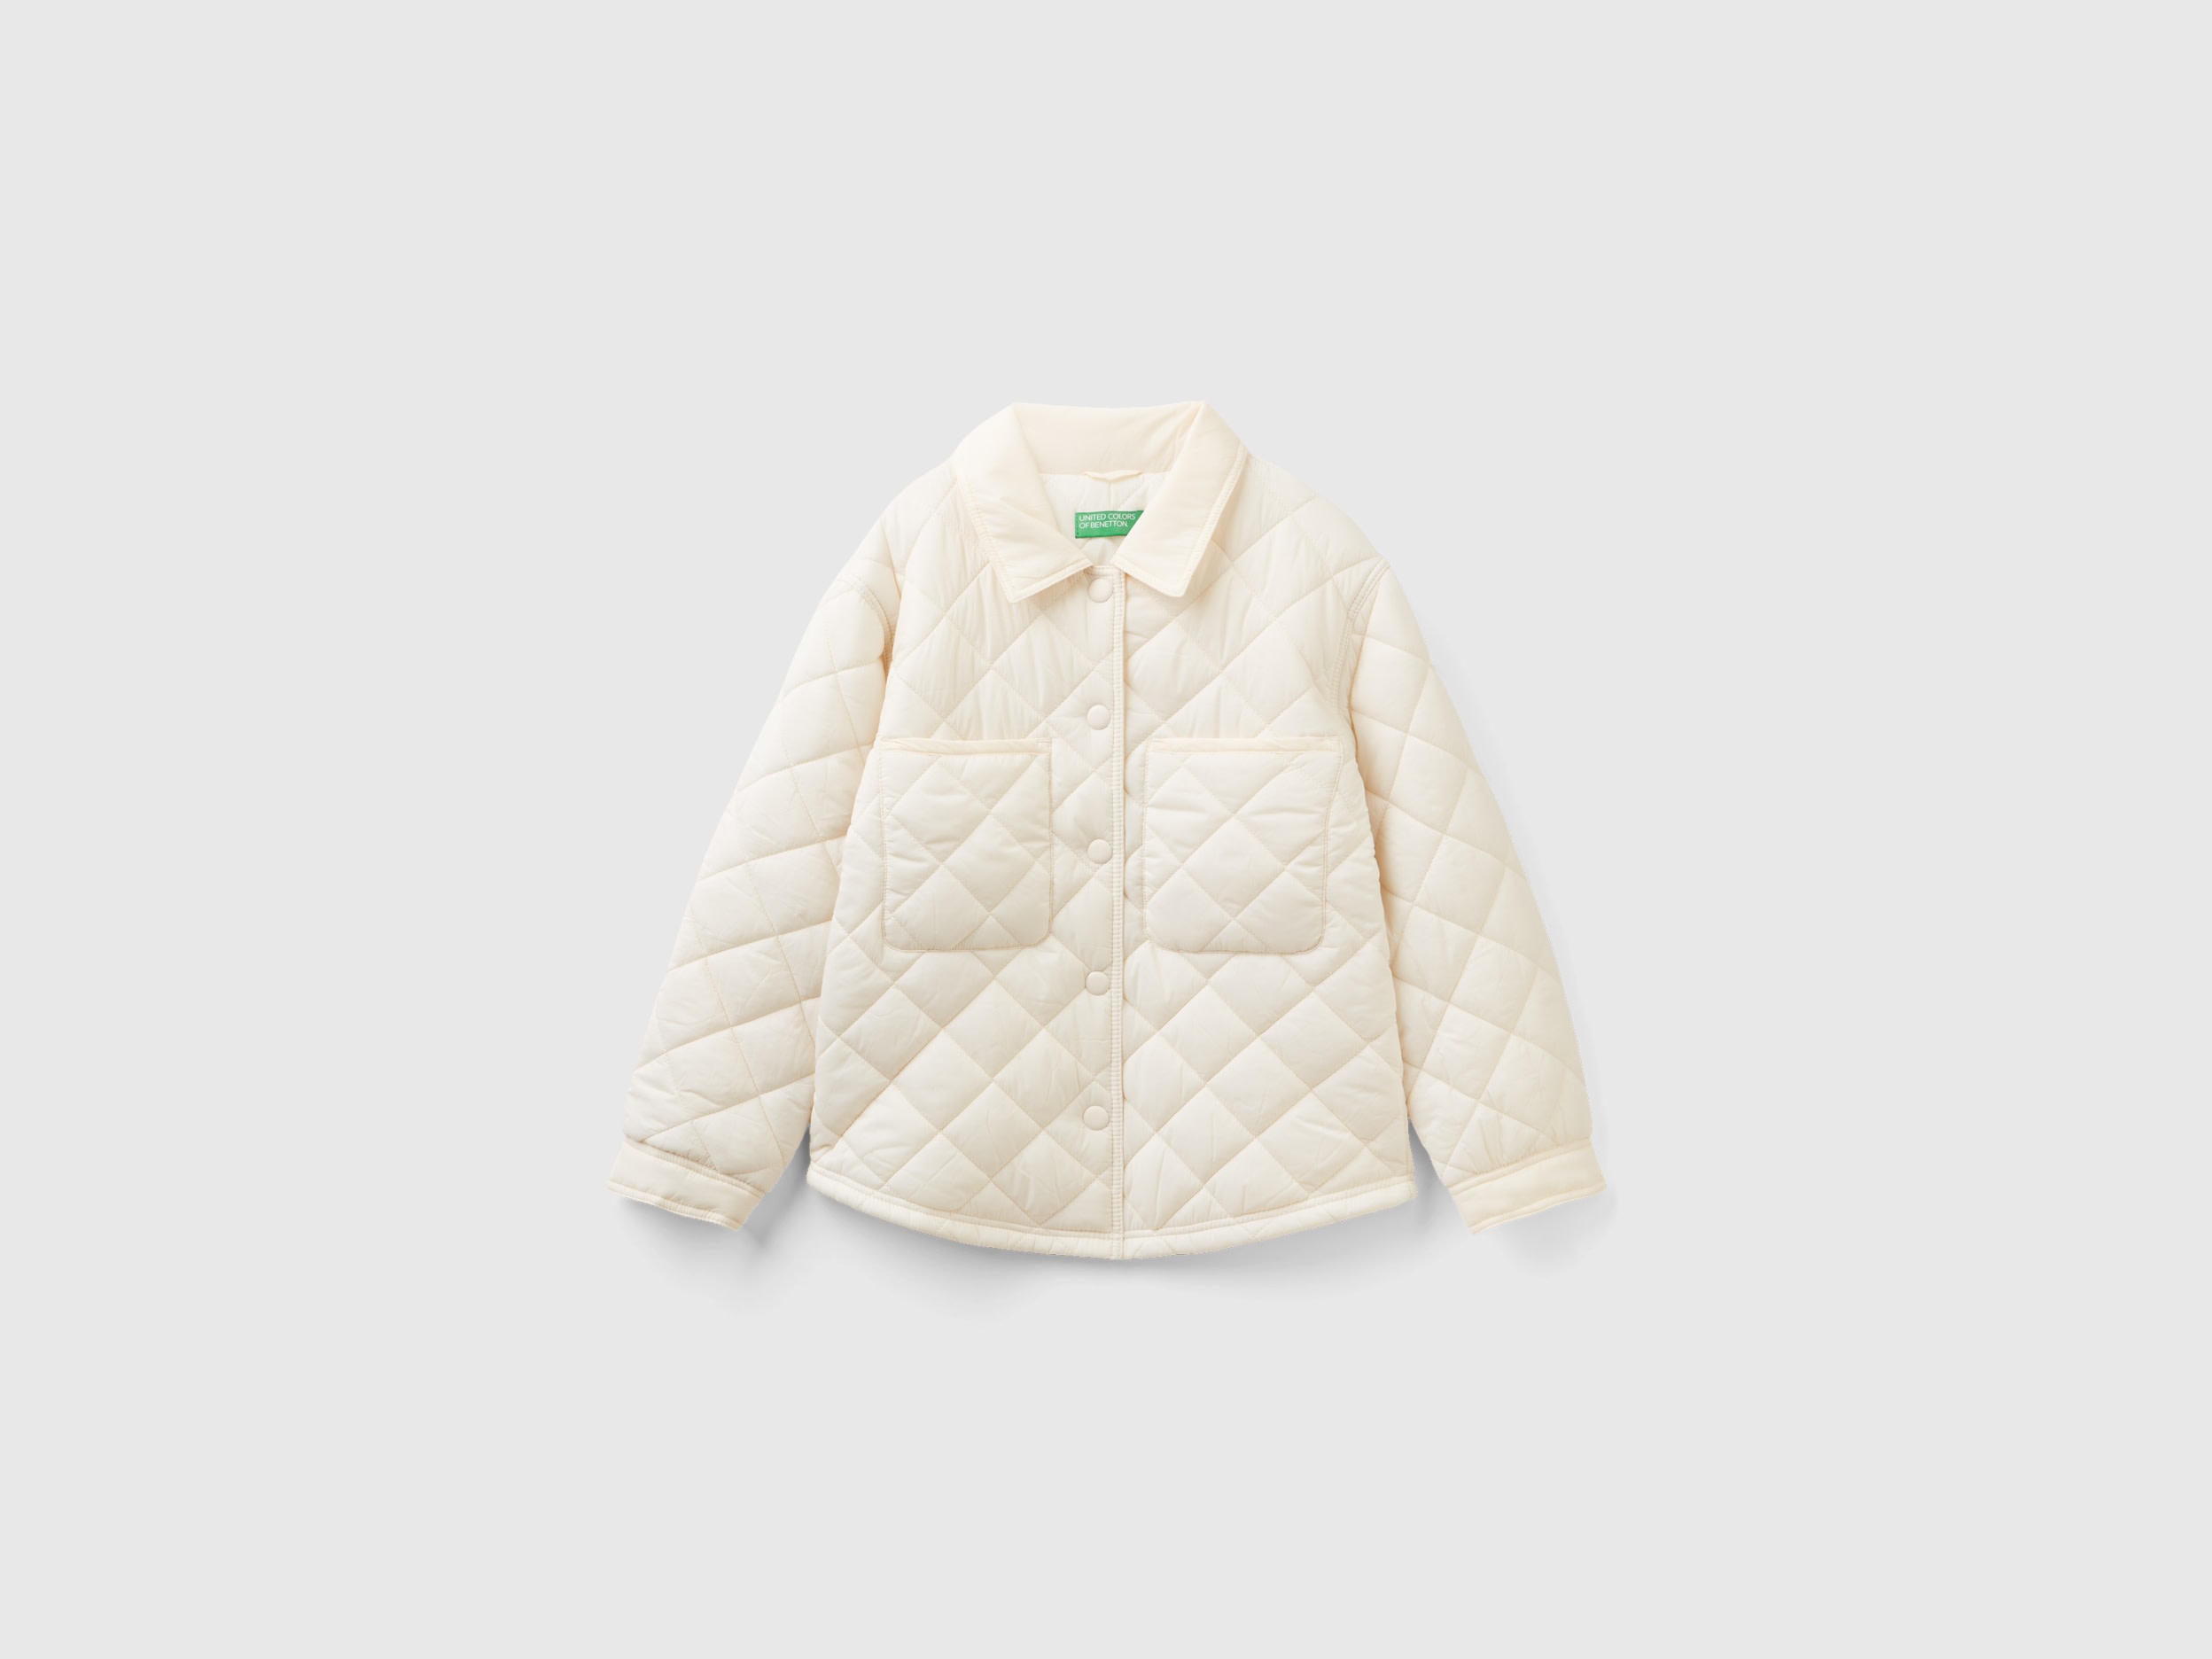 Benetton, Light Quilted Jacket, size 2XL, Creamy White, Kids